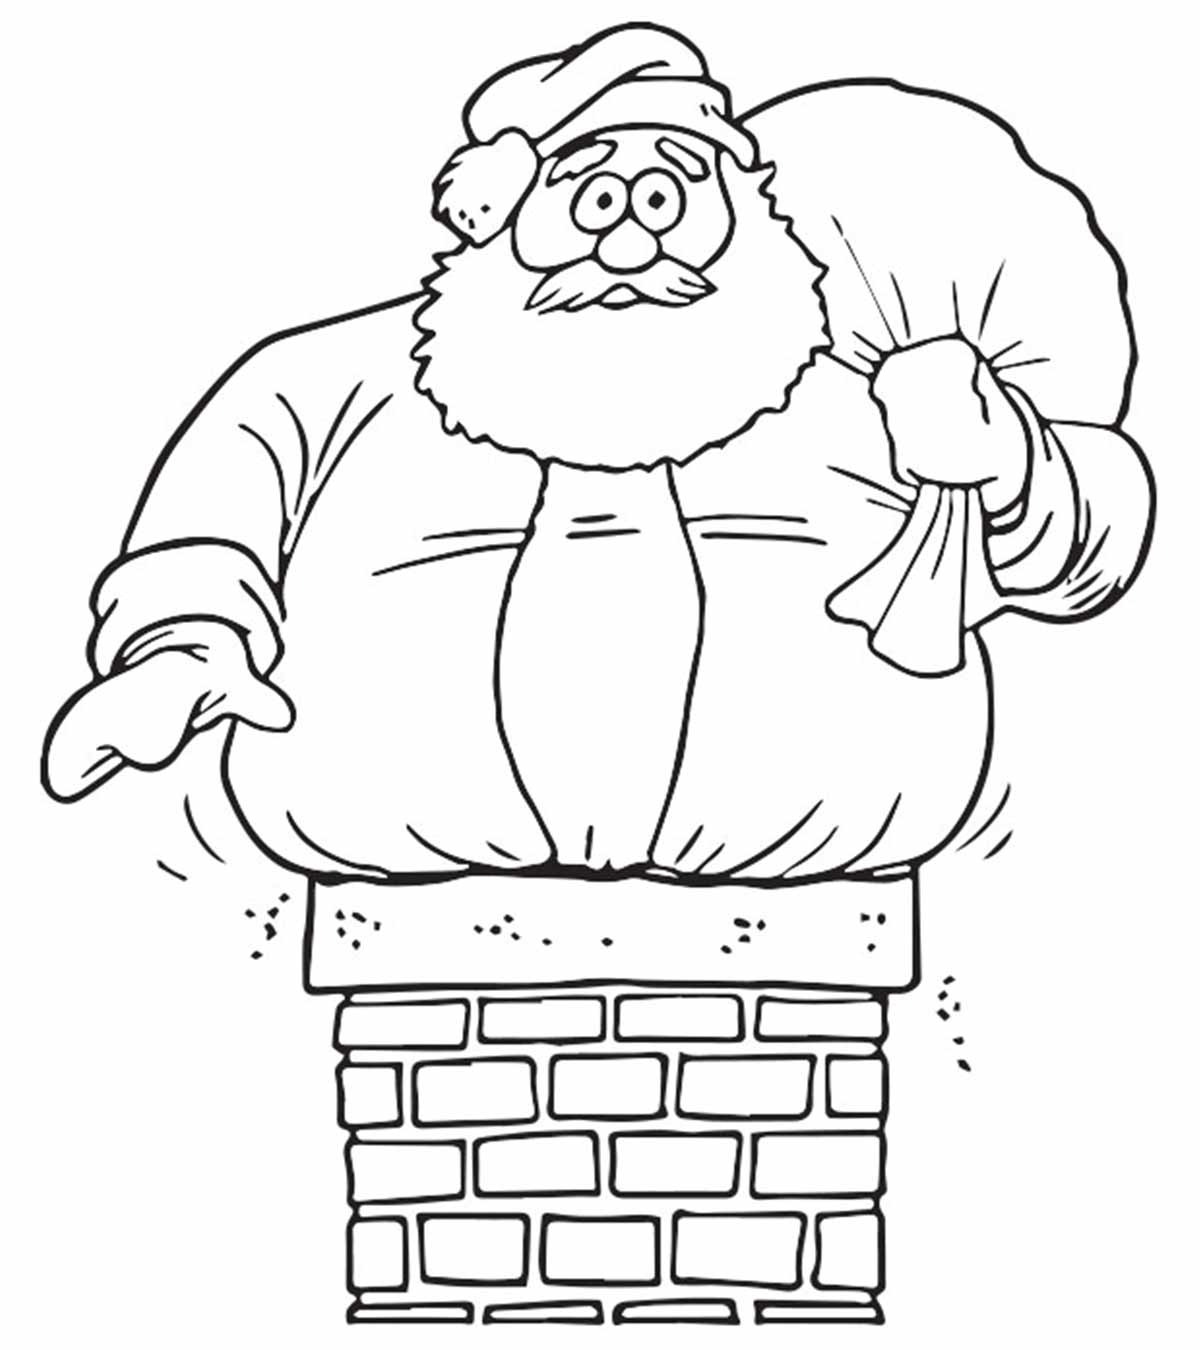 Santa Claus In Sleigh Coloring Page | Hakume Colors